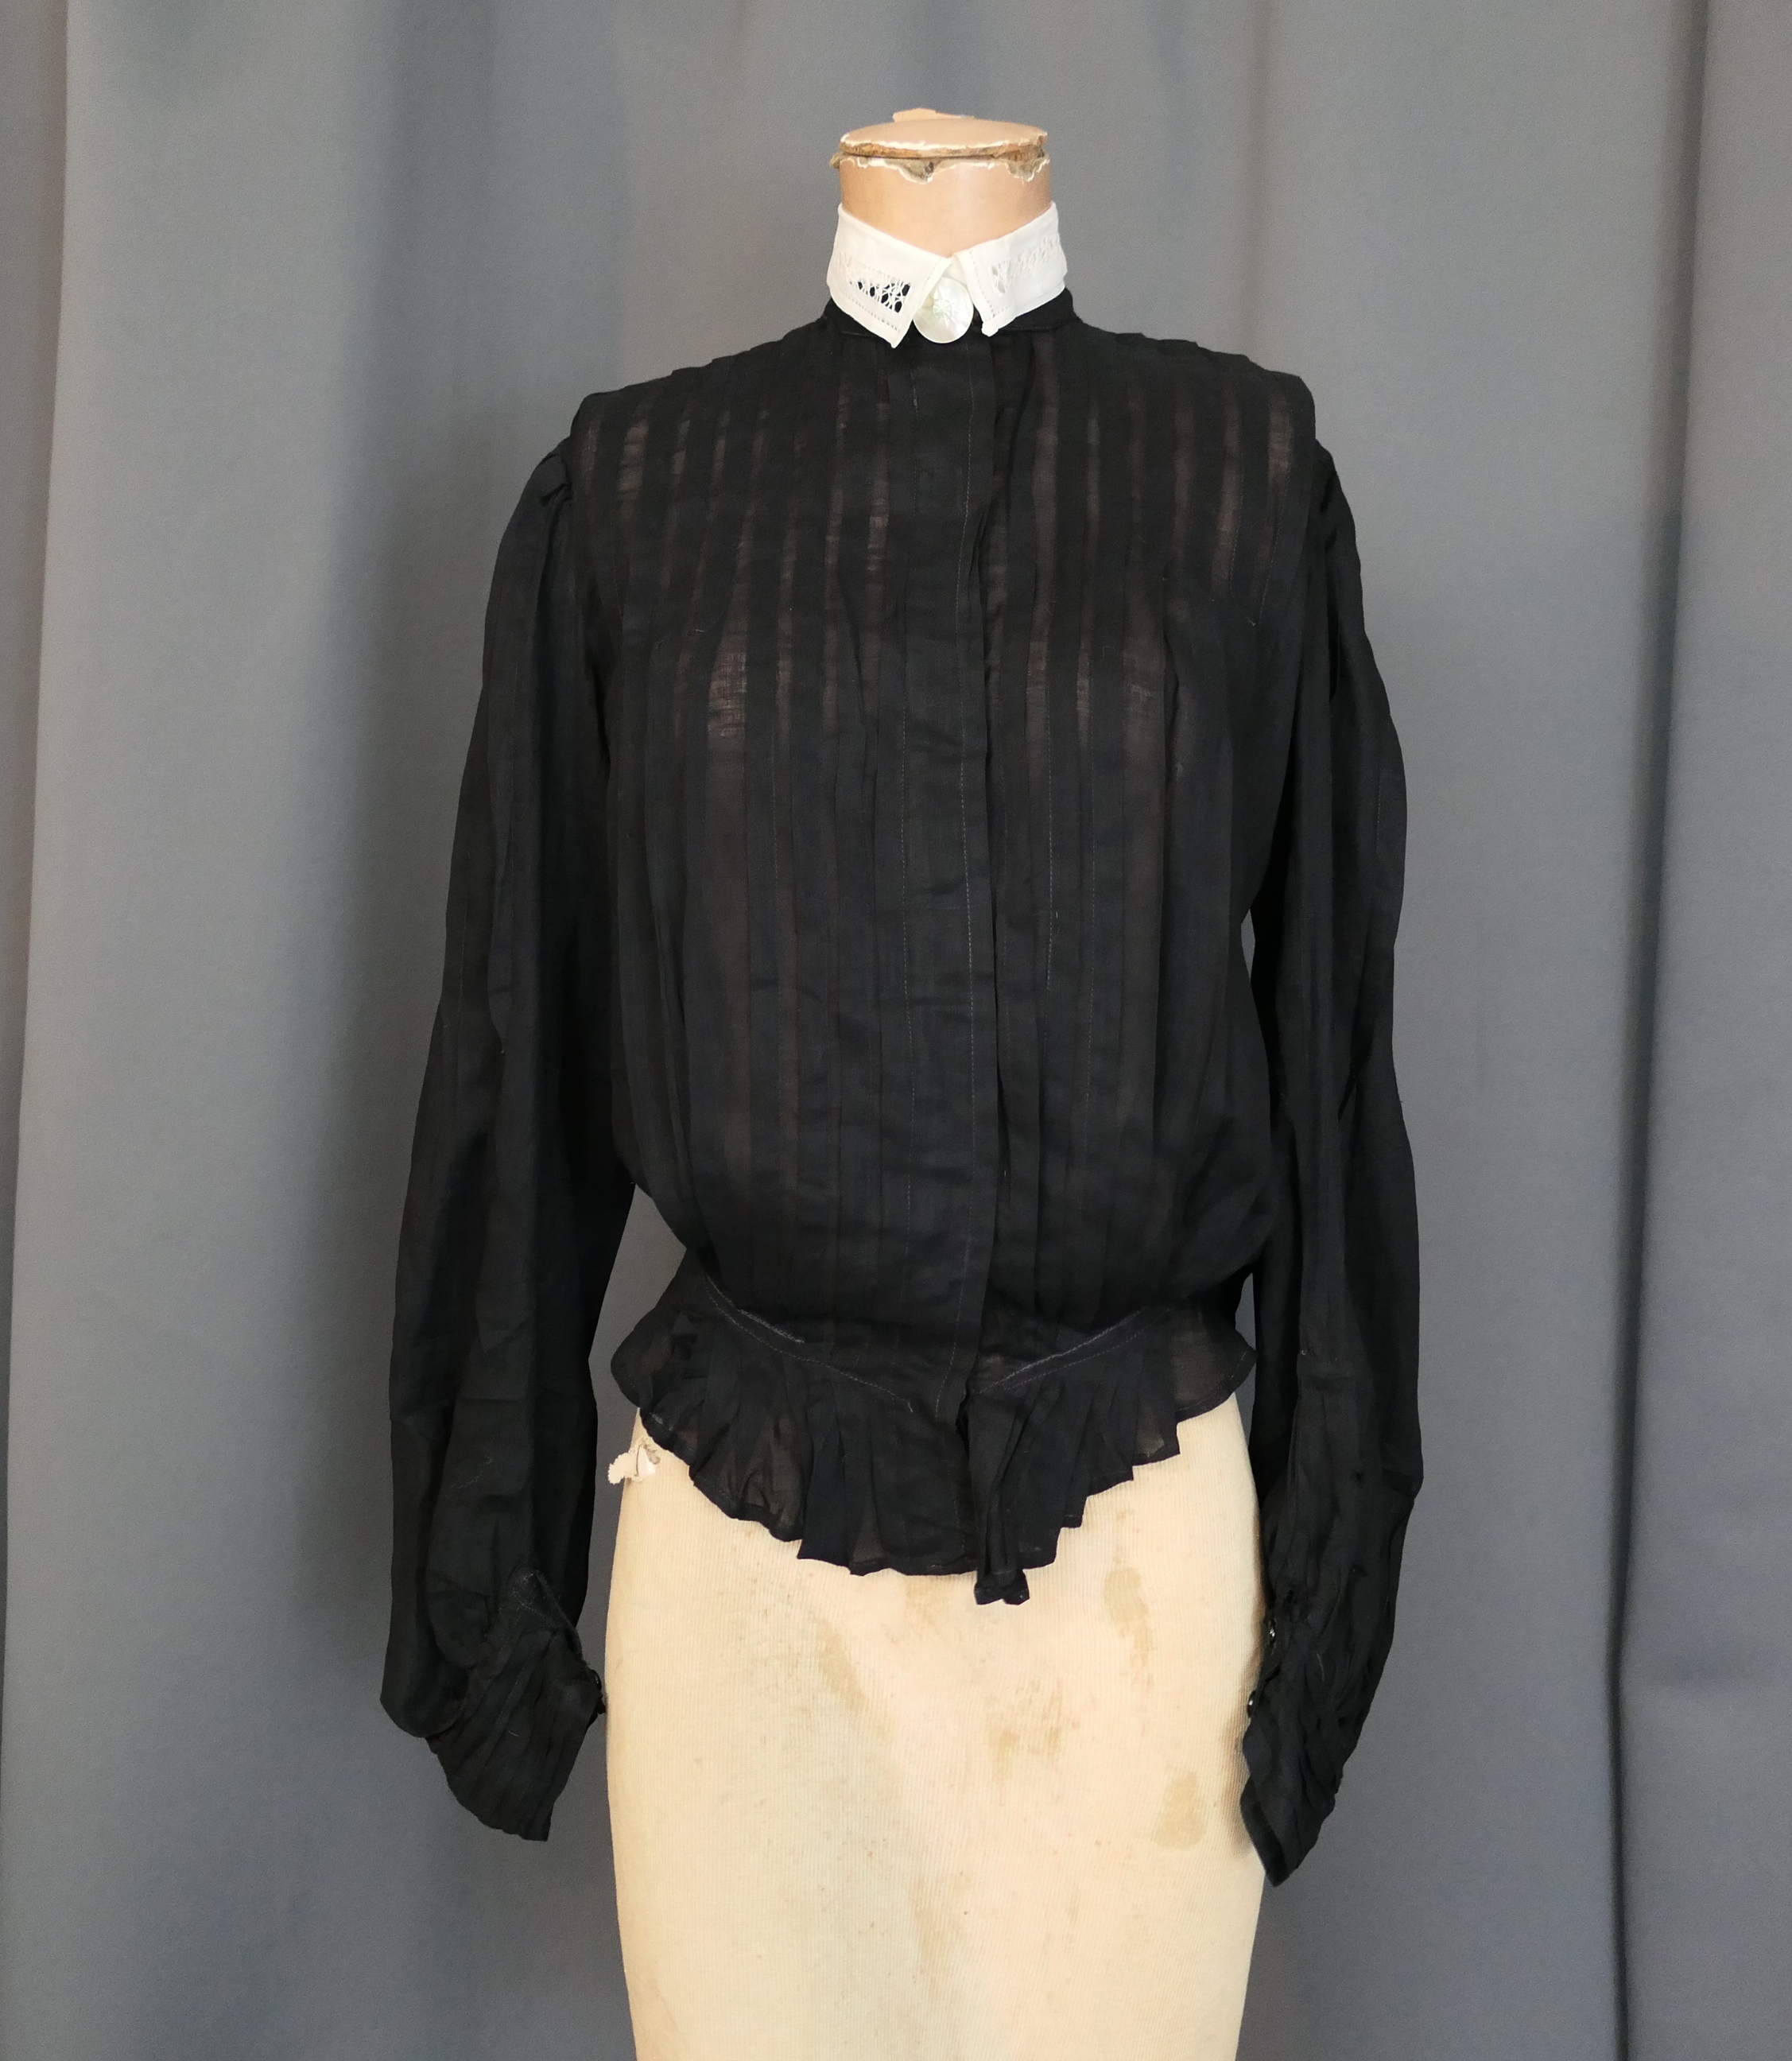 Vintage Black Cotton Blouse Edwardian 1900s, with White Collar & Cool  Button 32 inch bust